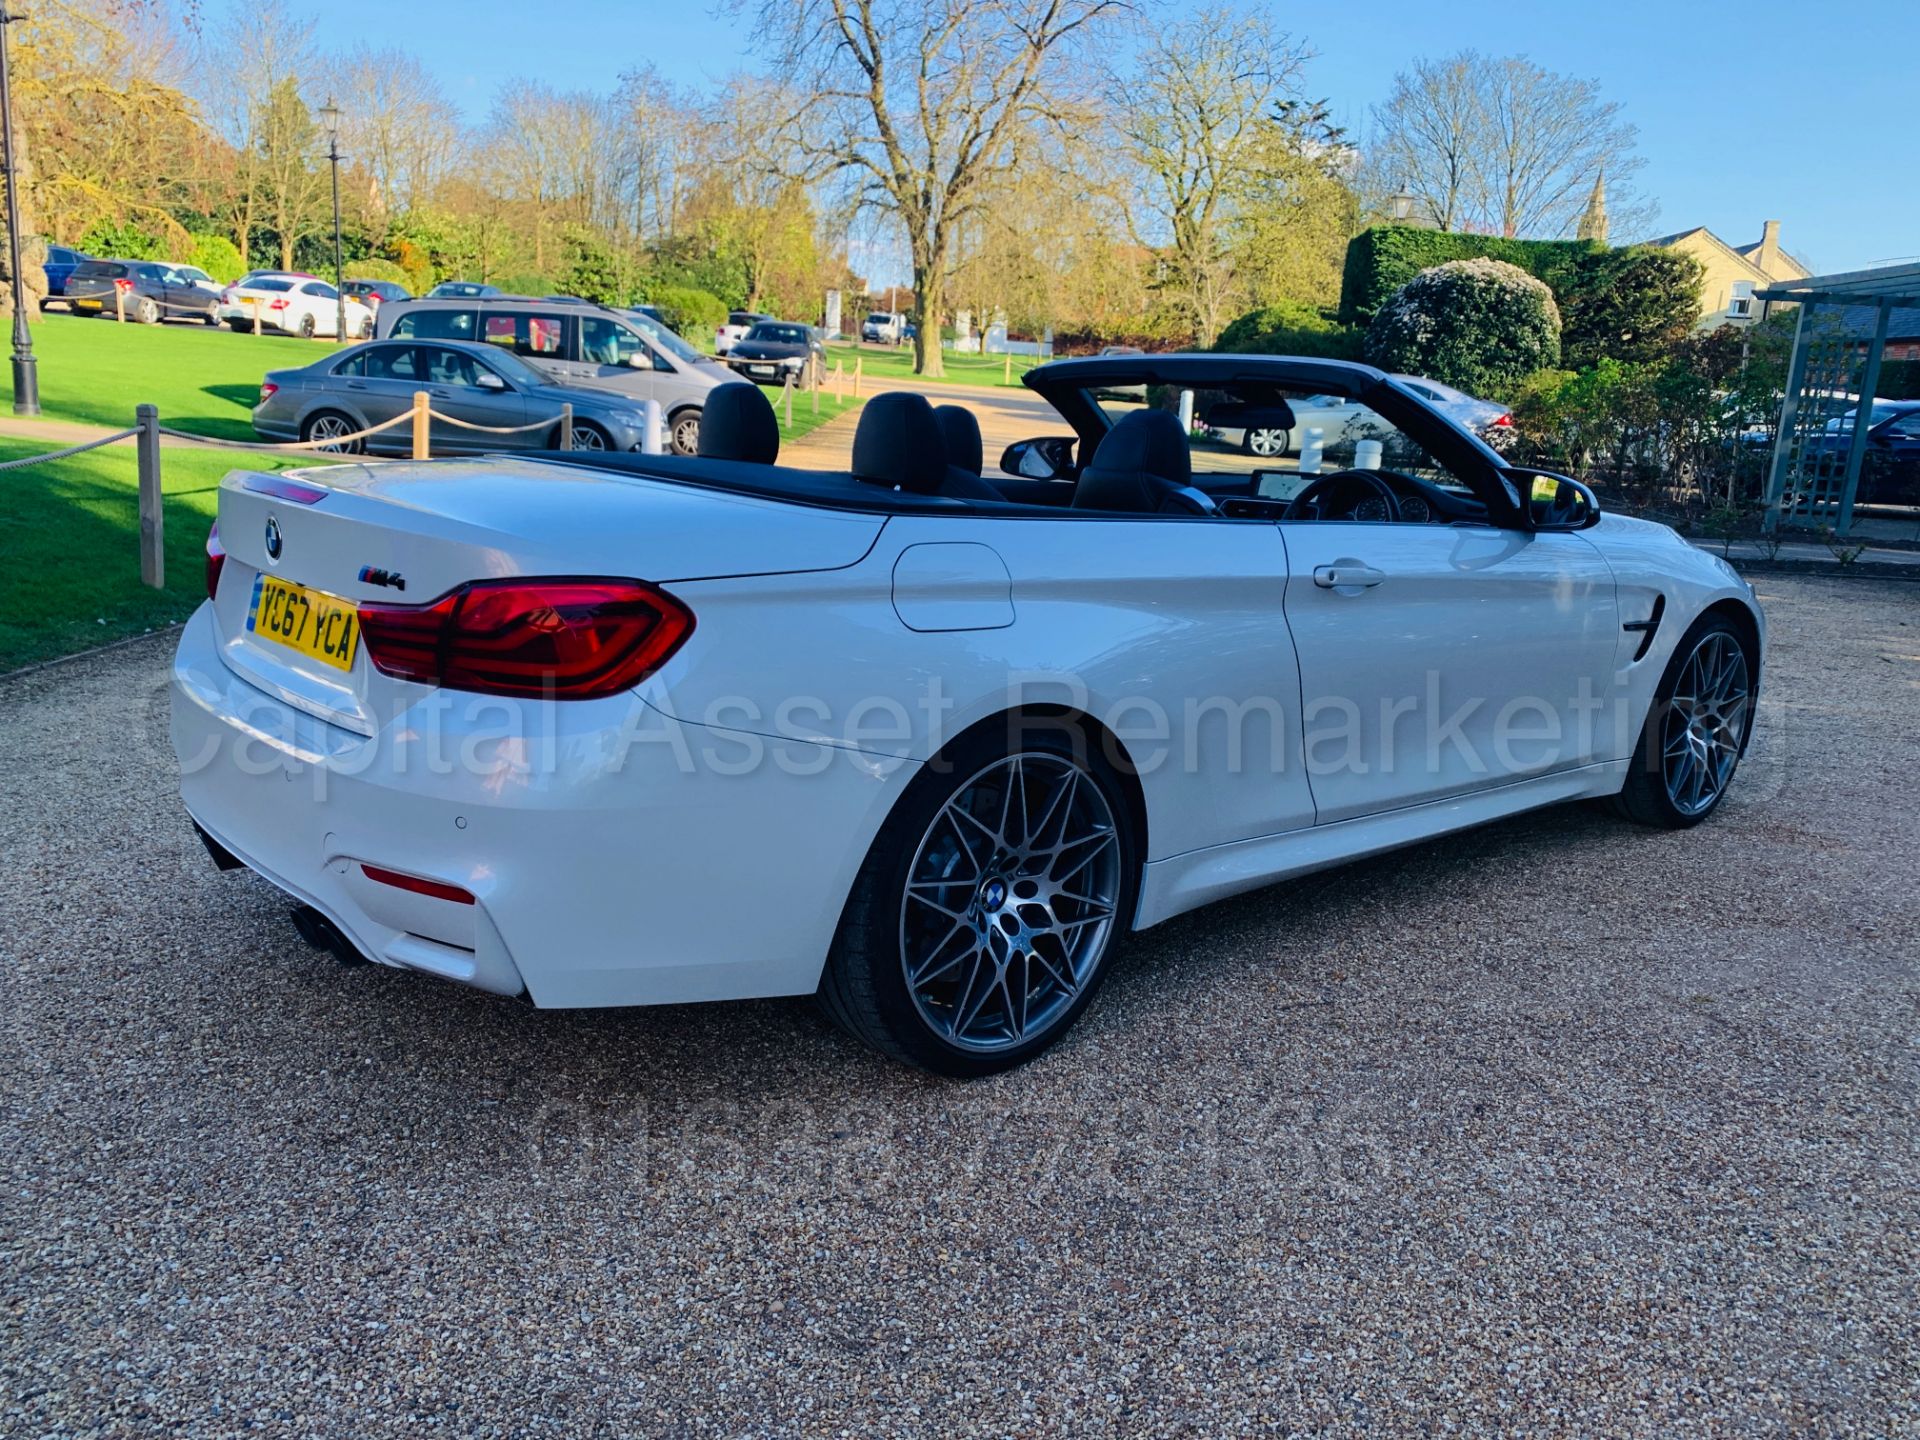 ON SALE BMW M4 CONVERTIBLE *COMPETITION PACKAGE* (2018 MODEL) '431 BHP - M DCT AUTO' WOW!!!!! - Image 15 of 89